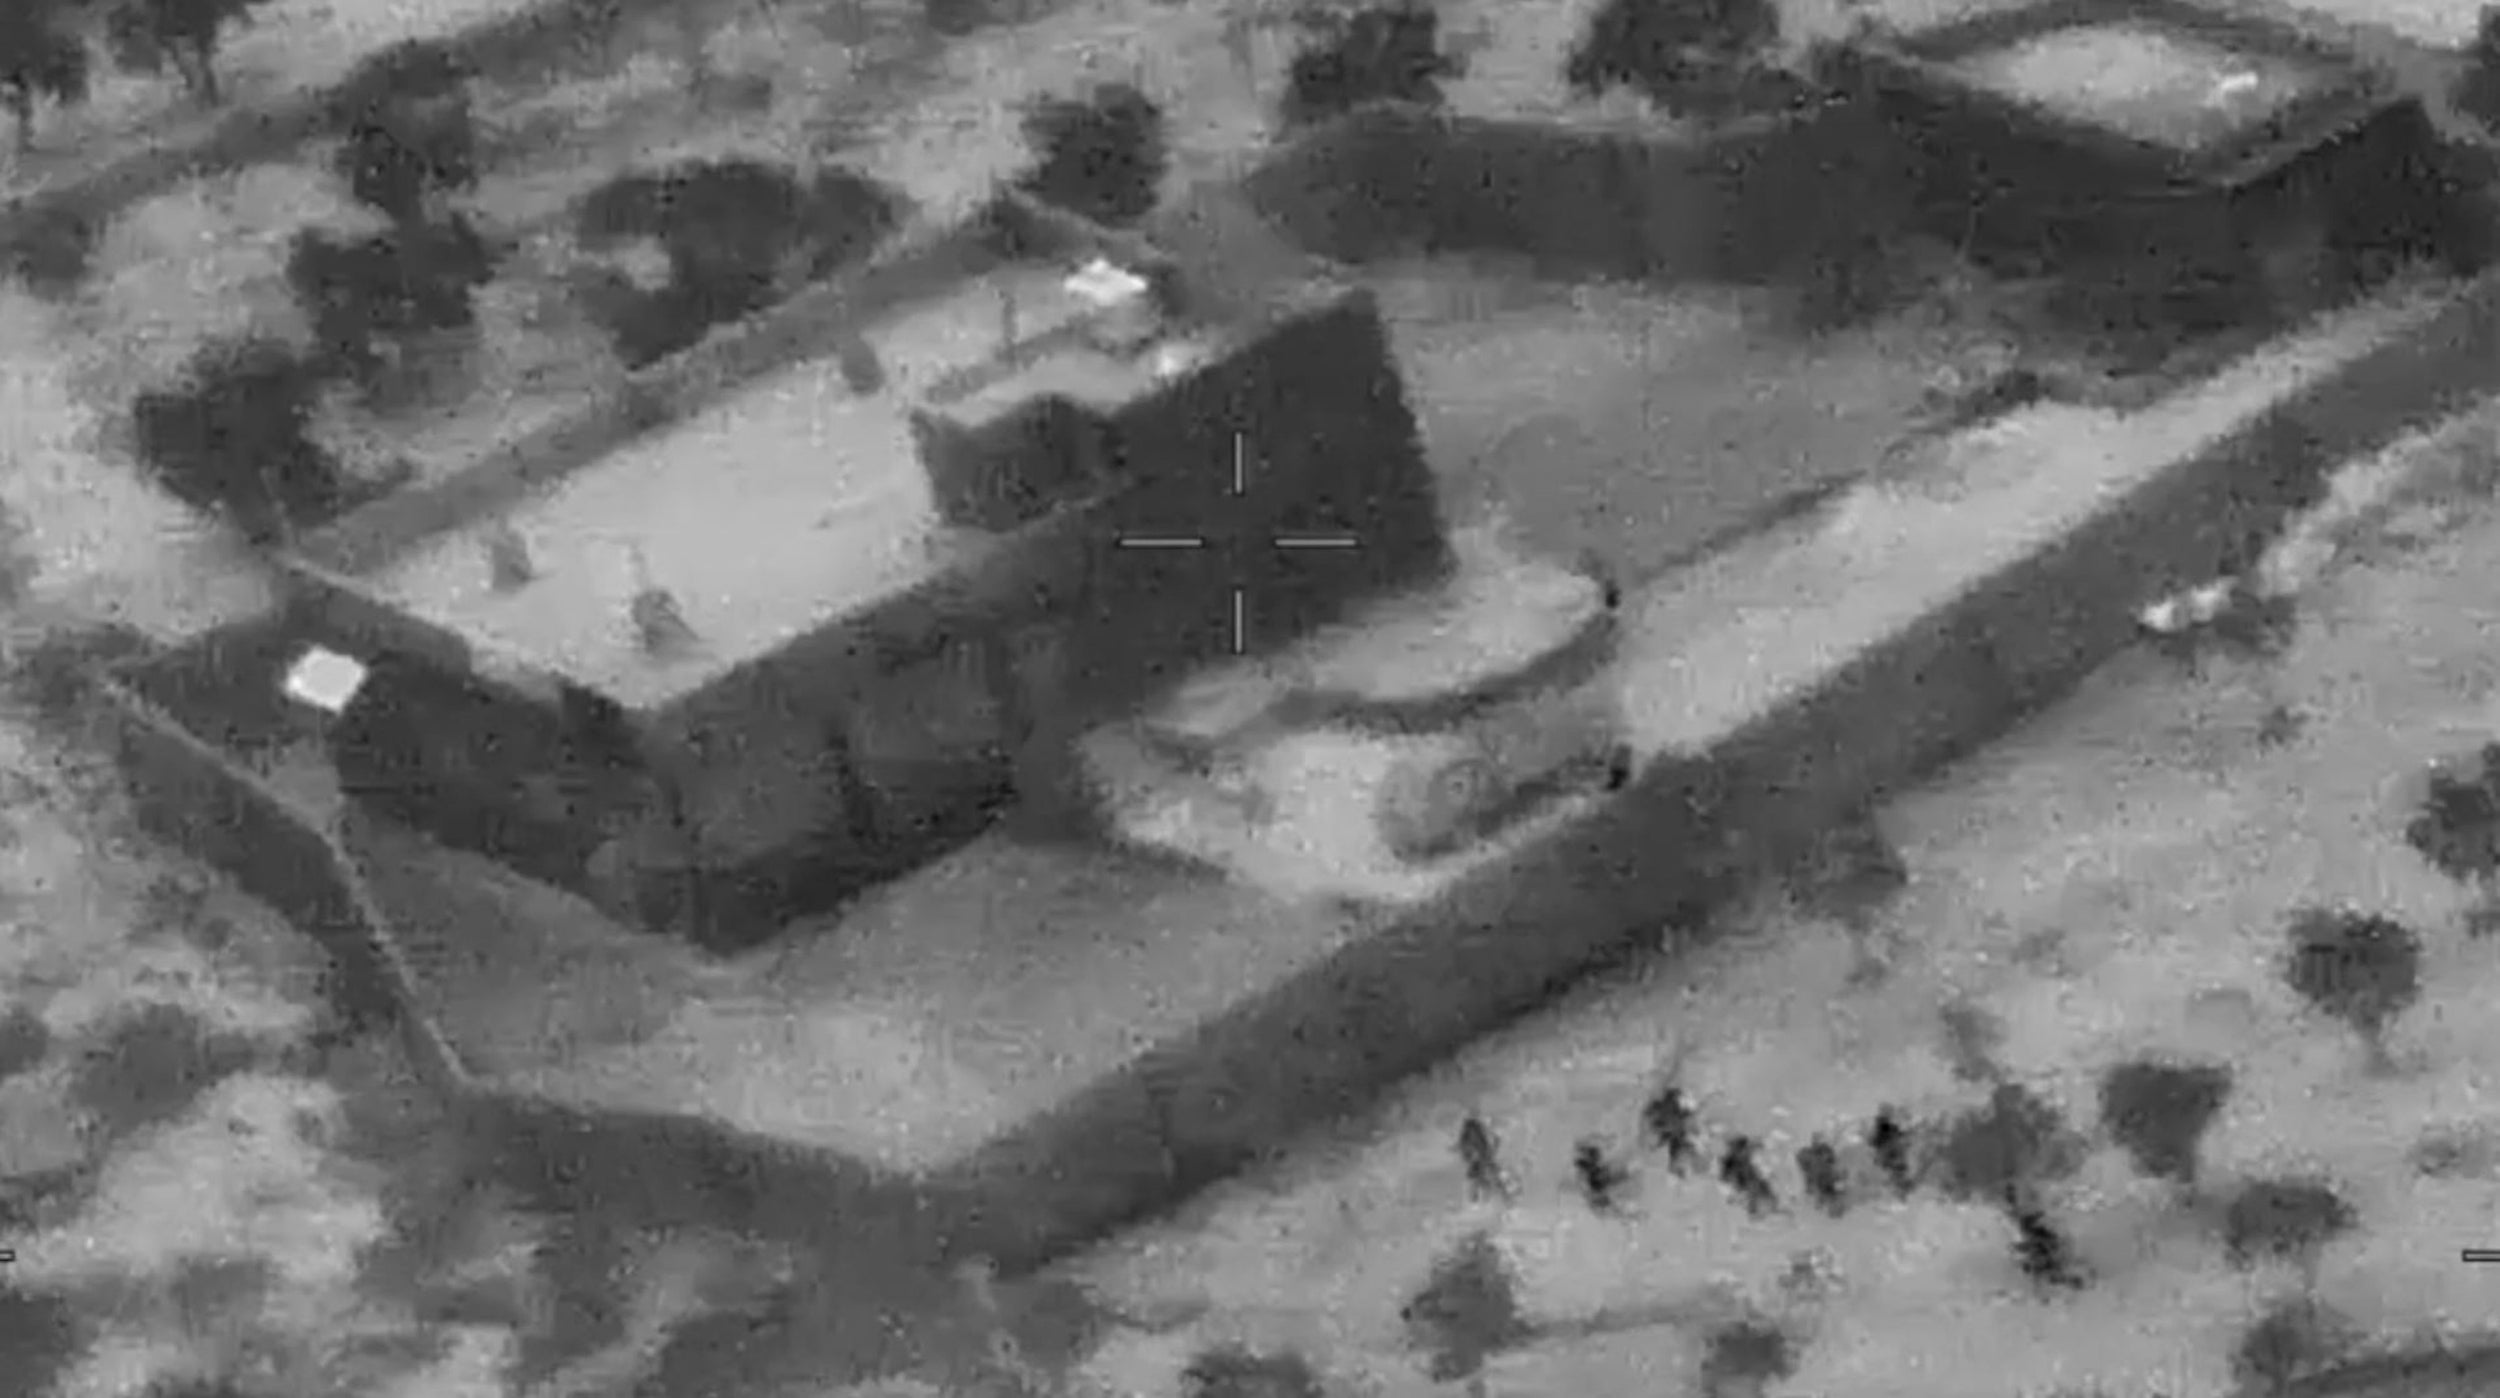 A photo released by the U.S. Defense Department showing the compound where ISIS leader Abu Bakr al-Baghdadi was killed by U.S. Special Forces in Syria